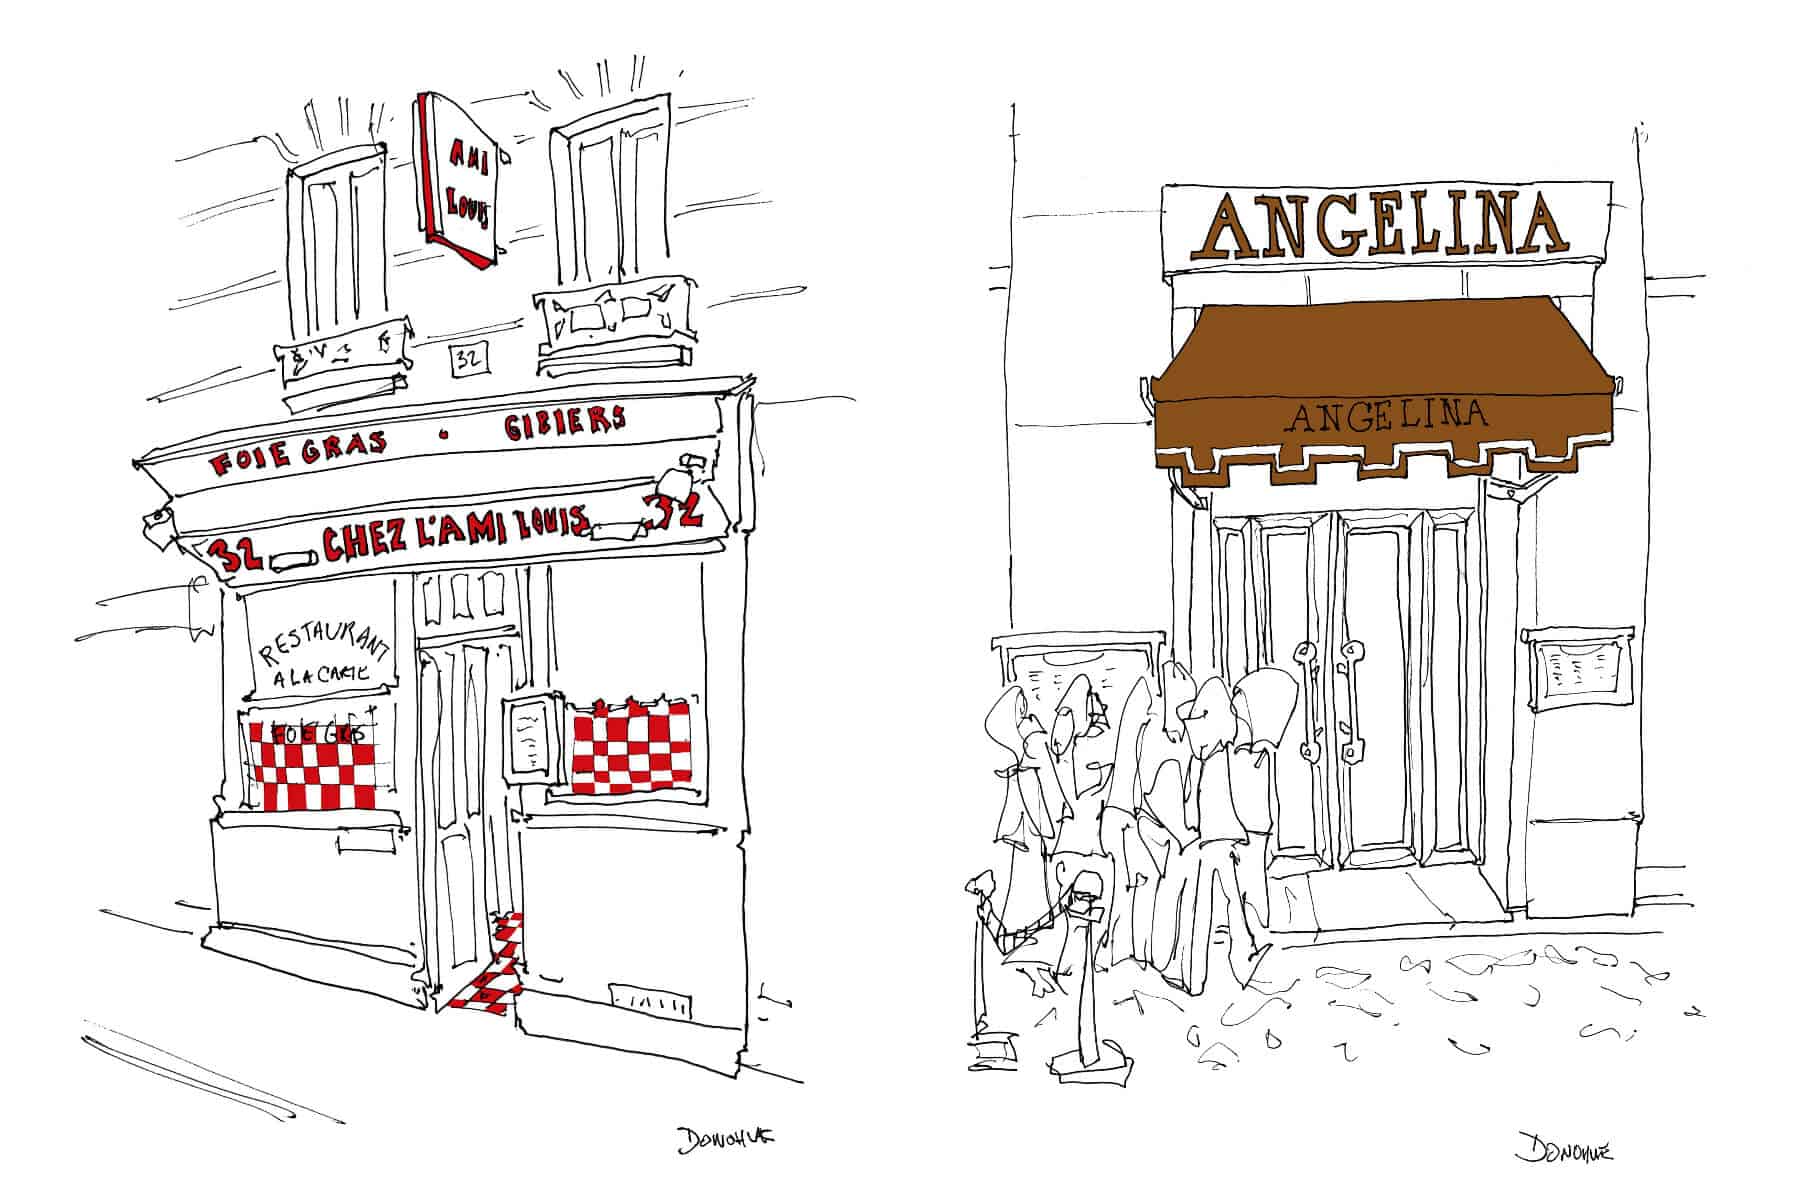 A montage of John Donohue's sketches of Parisian restaurants. On the left is a drawing of the restaurant "Chez L'Ami Louis" in black, white, and red. On the right is a drawing of the restaurant/pâtisserie "Angelina", with its usual queue of people outside, in brown, black, and white.